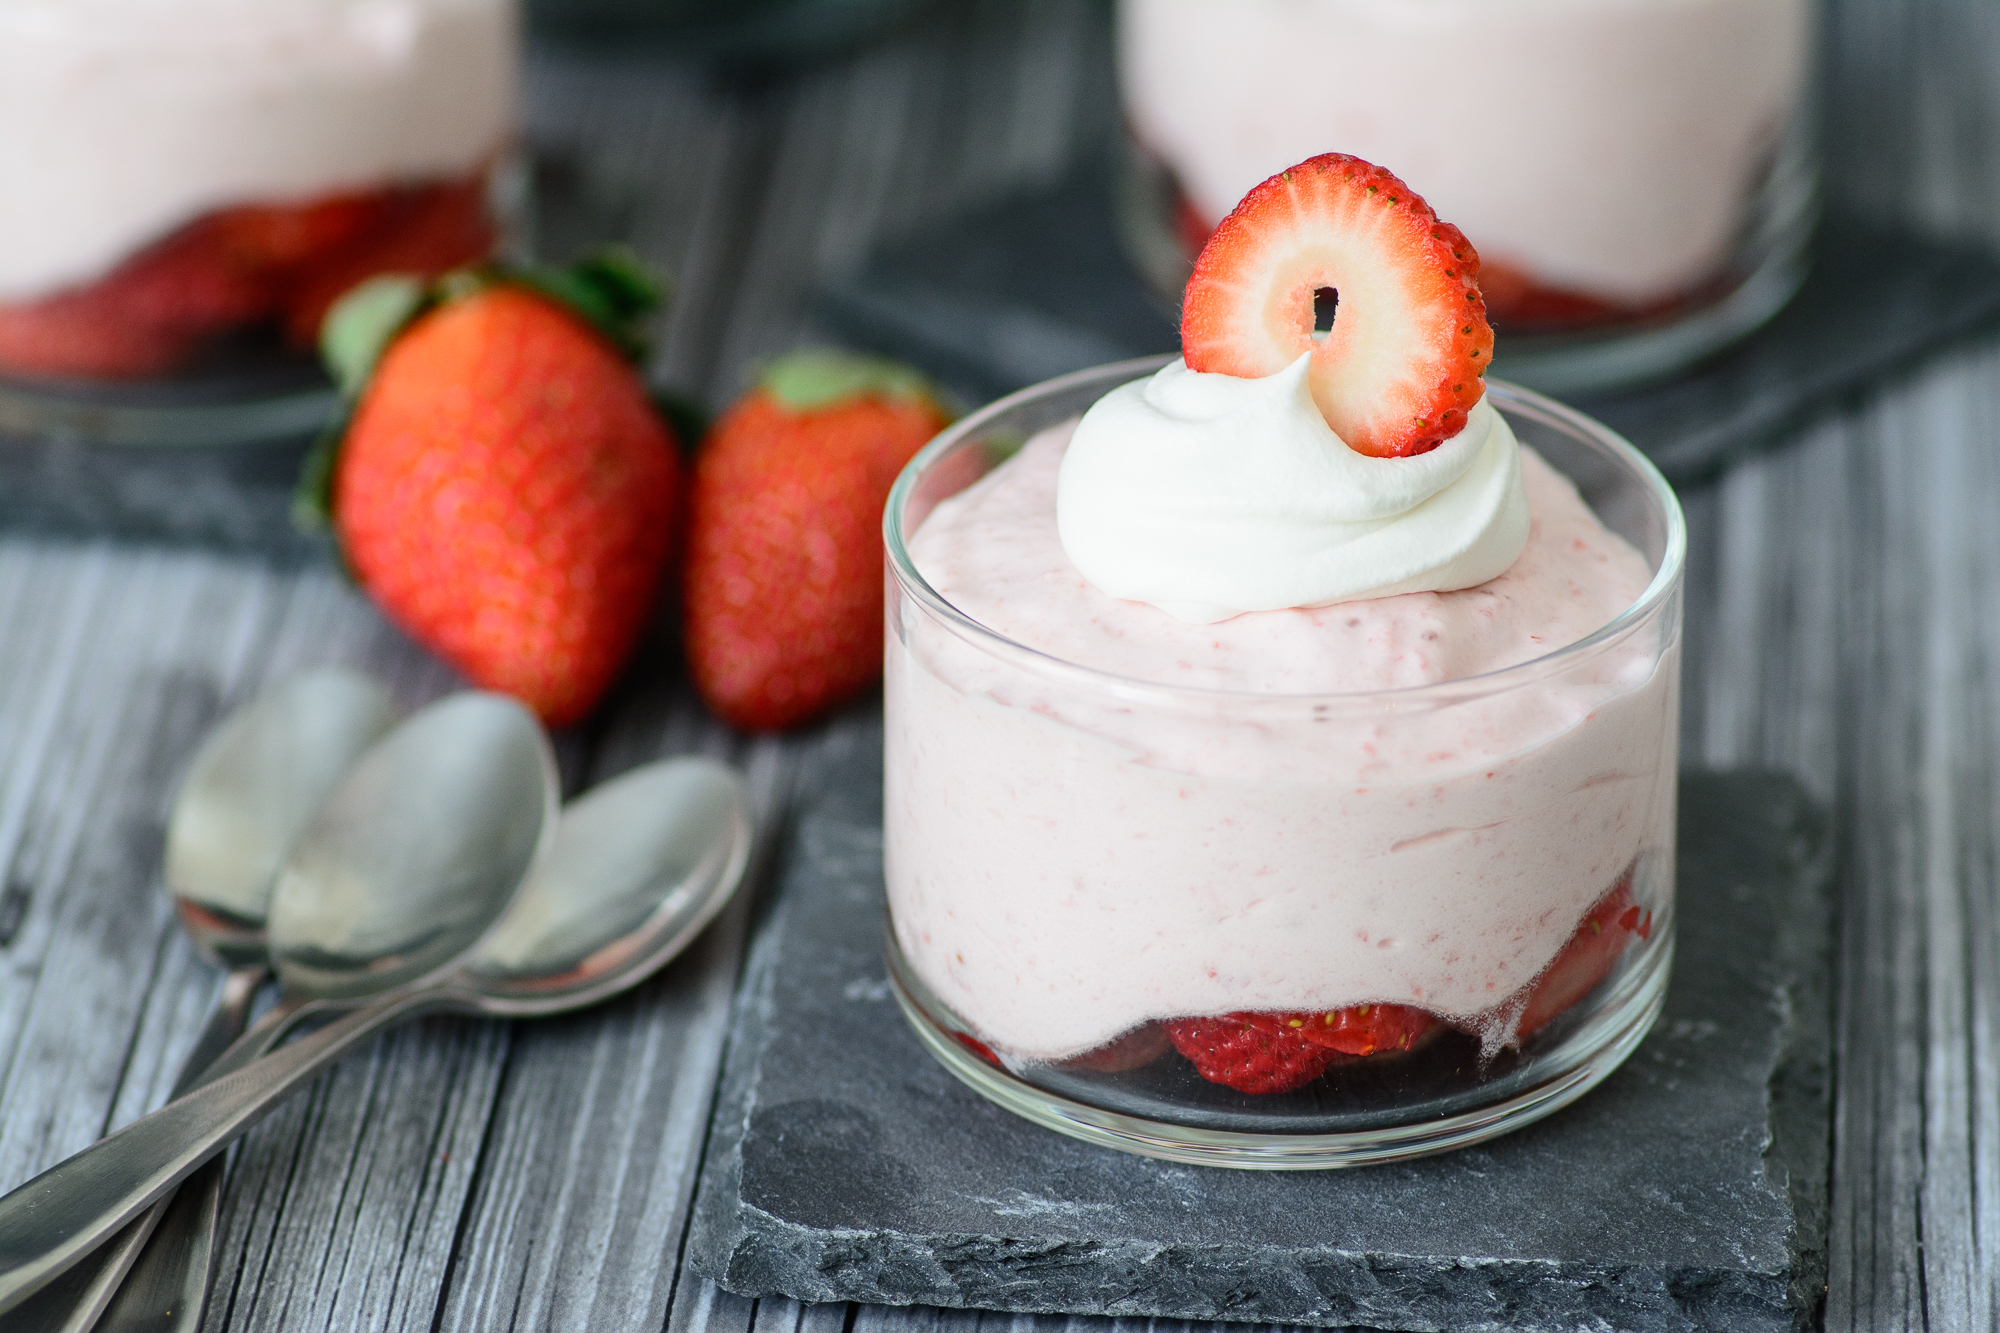 3 Ingredient Strawberry Mousse